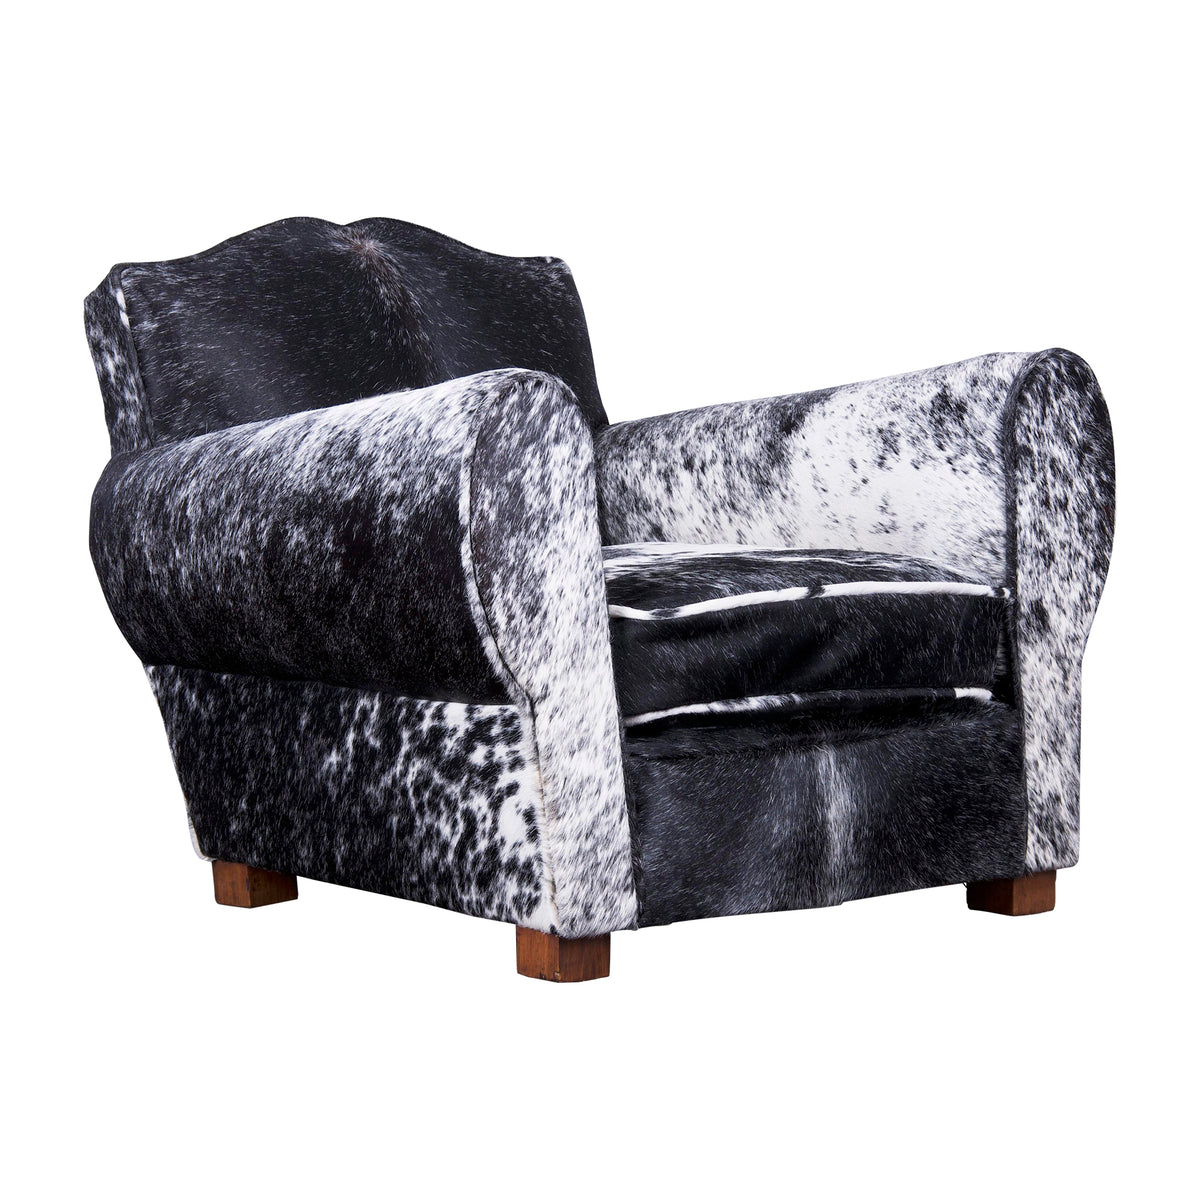 1930s French Art Deco Mustache Back Club Chair W/ Black and White Speckled Cowhide